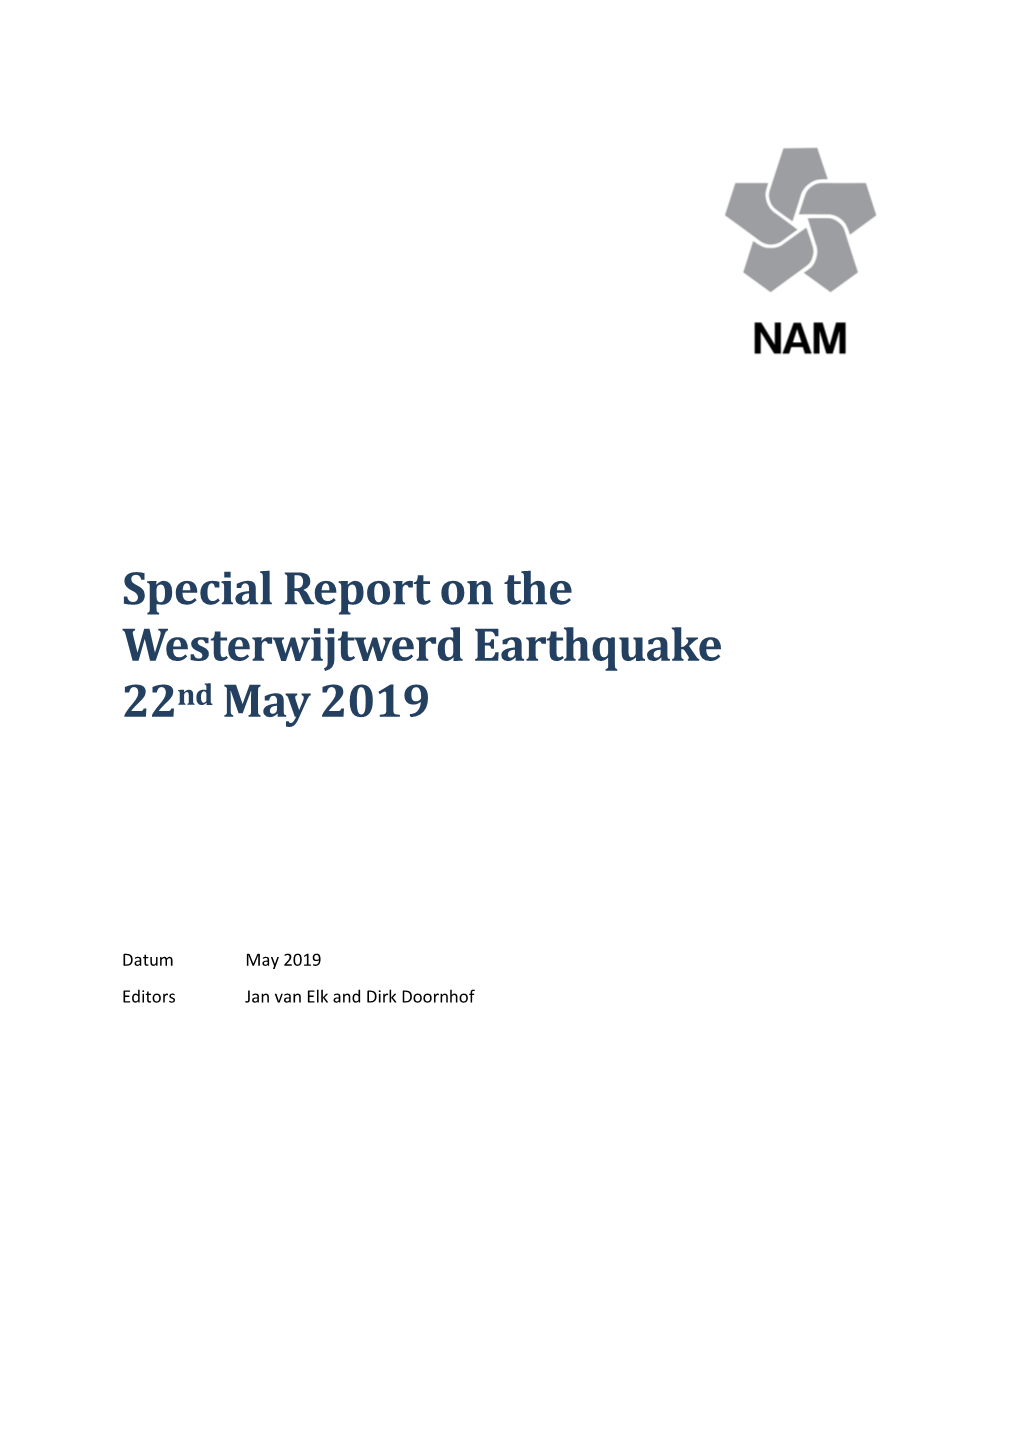 Special Report on the Westerwijtwerd Earthquake 22Nd May 2019